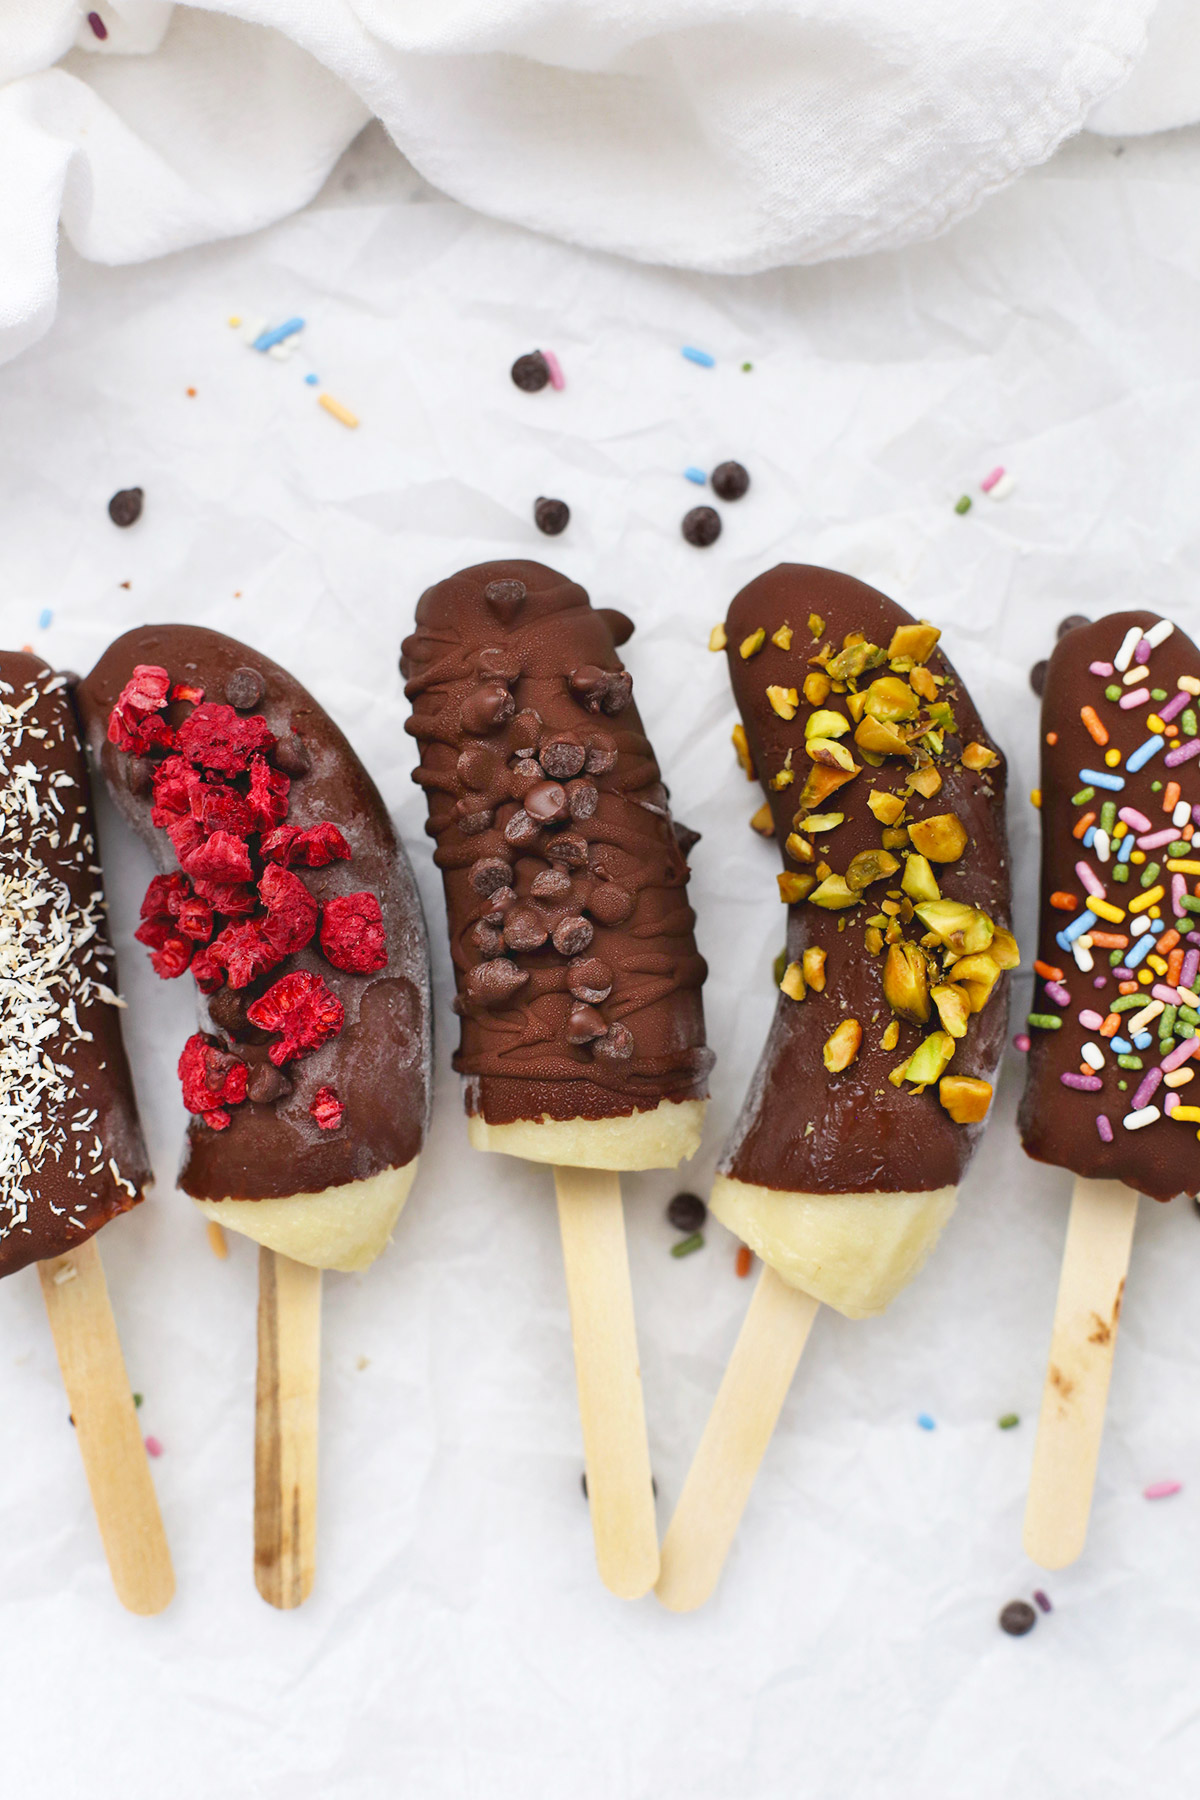 Frozen Chocolate Covered Bananas with different toppings on a piece of parchment paper